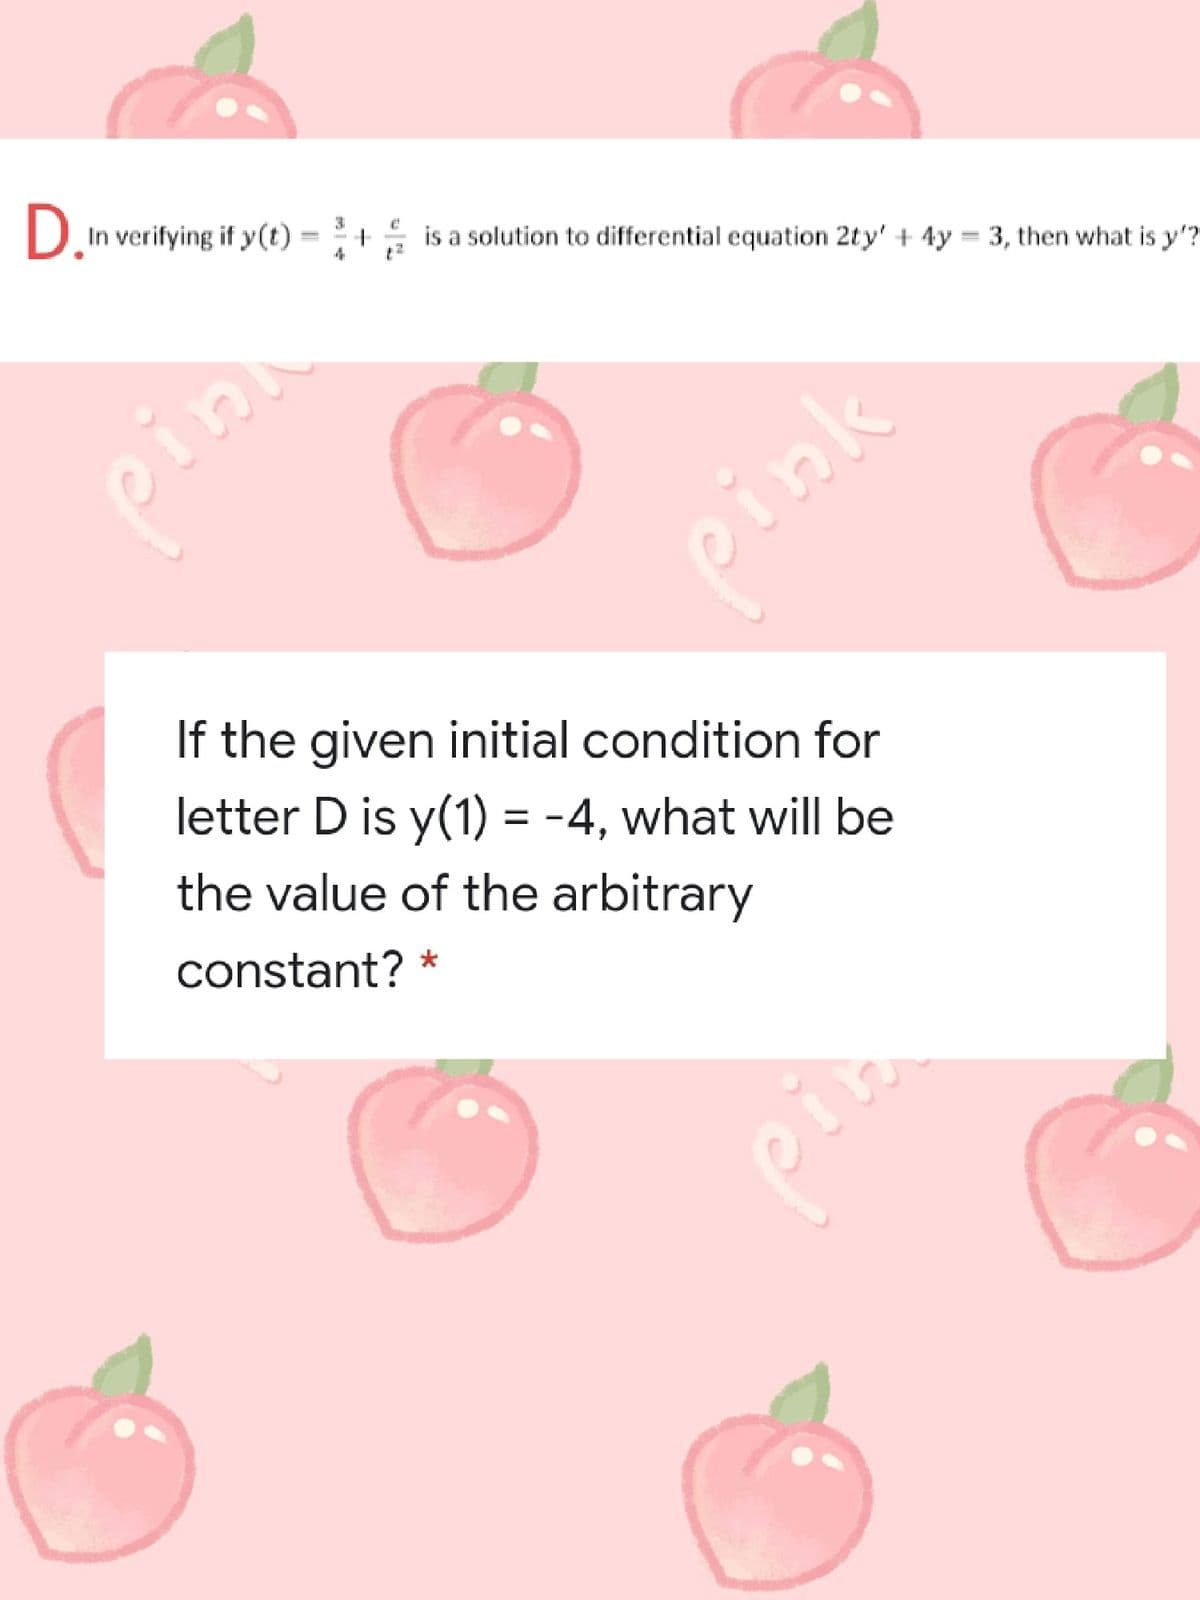 D.
In verifying if y(t)
3
is a solution to differential equation 2ty' + 4y = 3, then what is y'?
pinn
ink
If the given initial condition for
letter D is y(1) = -4, what will be
the value of the arbitrary
constant? *
in
